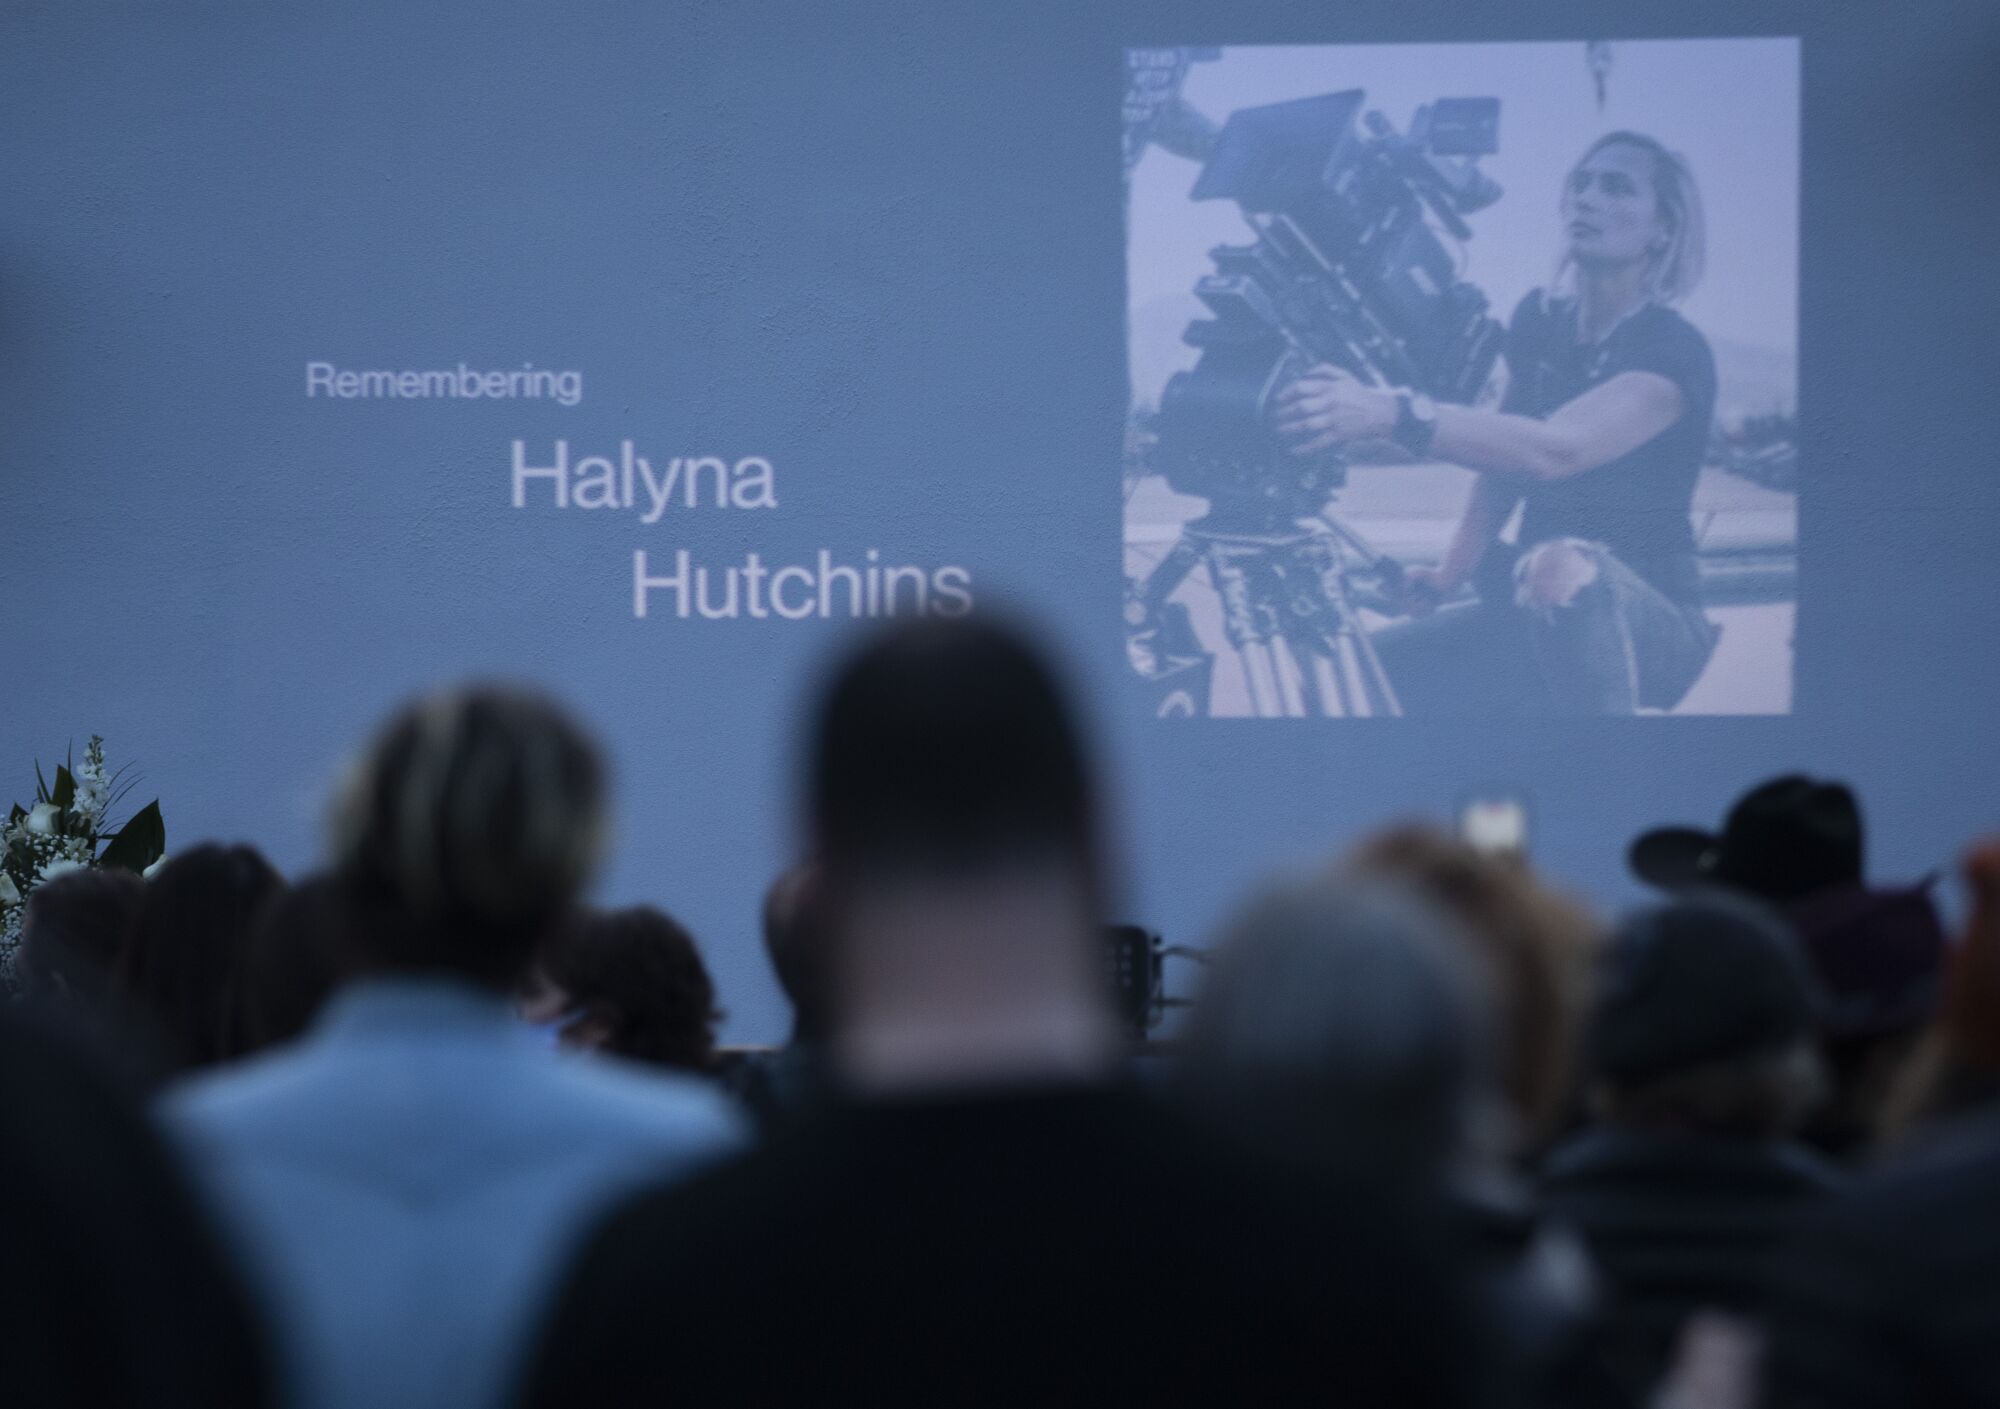 An image of cinematographer Halyna Hutchins is shown at a candlelight vigil Sunday.